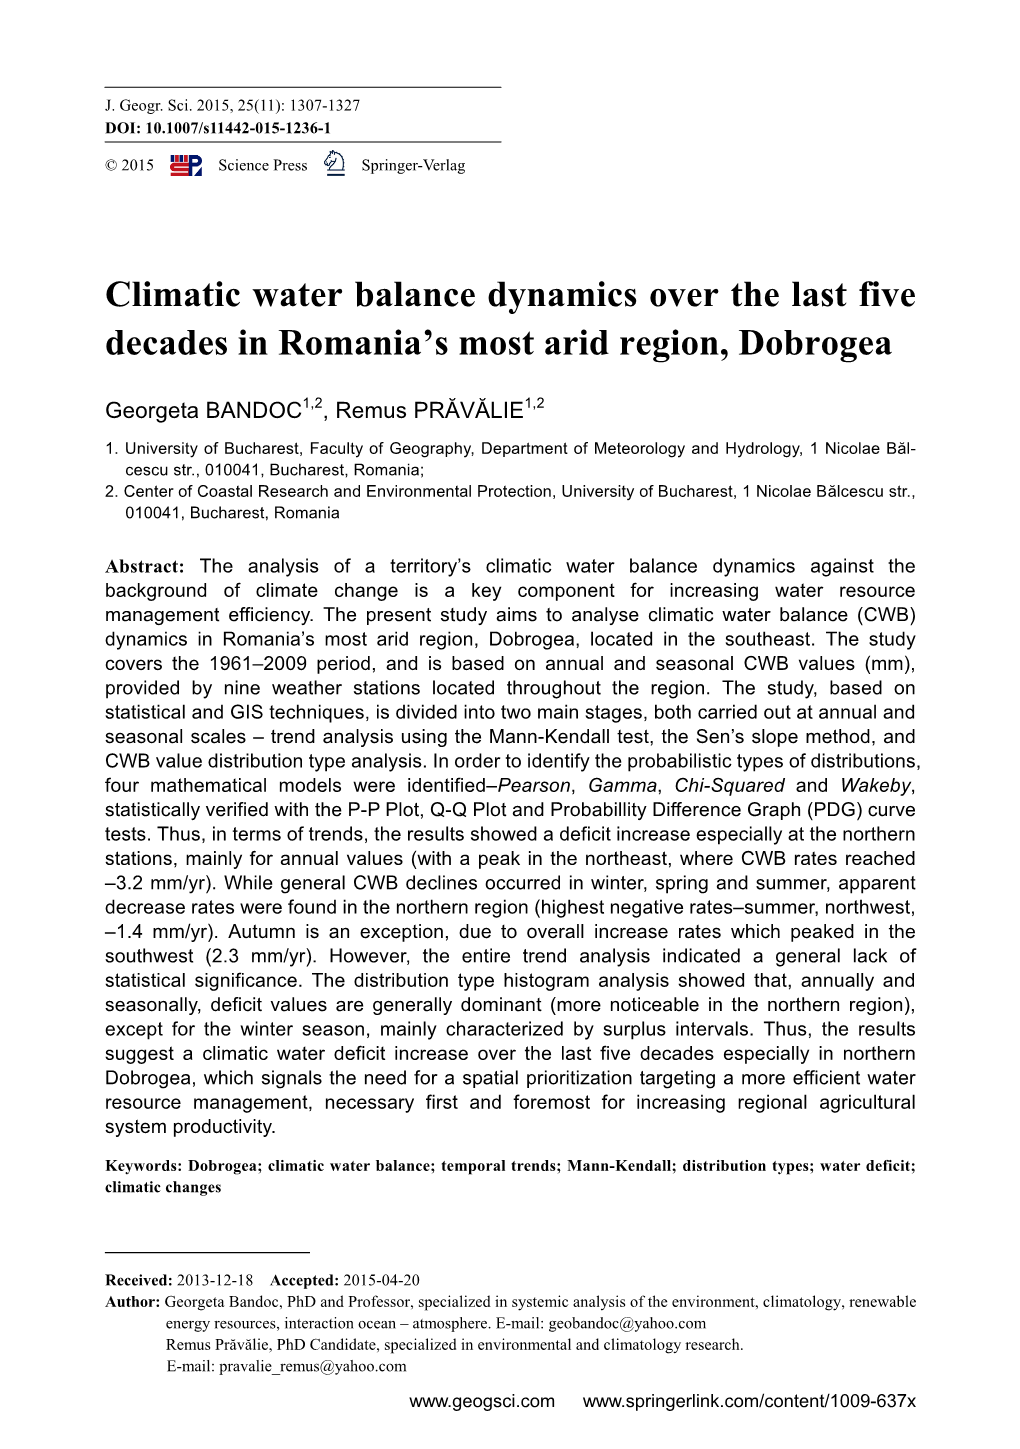 Climatic Water Balance Dynamics Over the Last Five Decades in Romania's